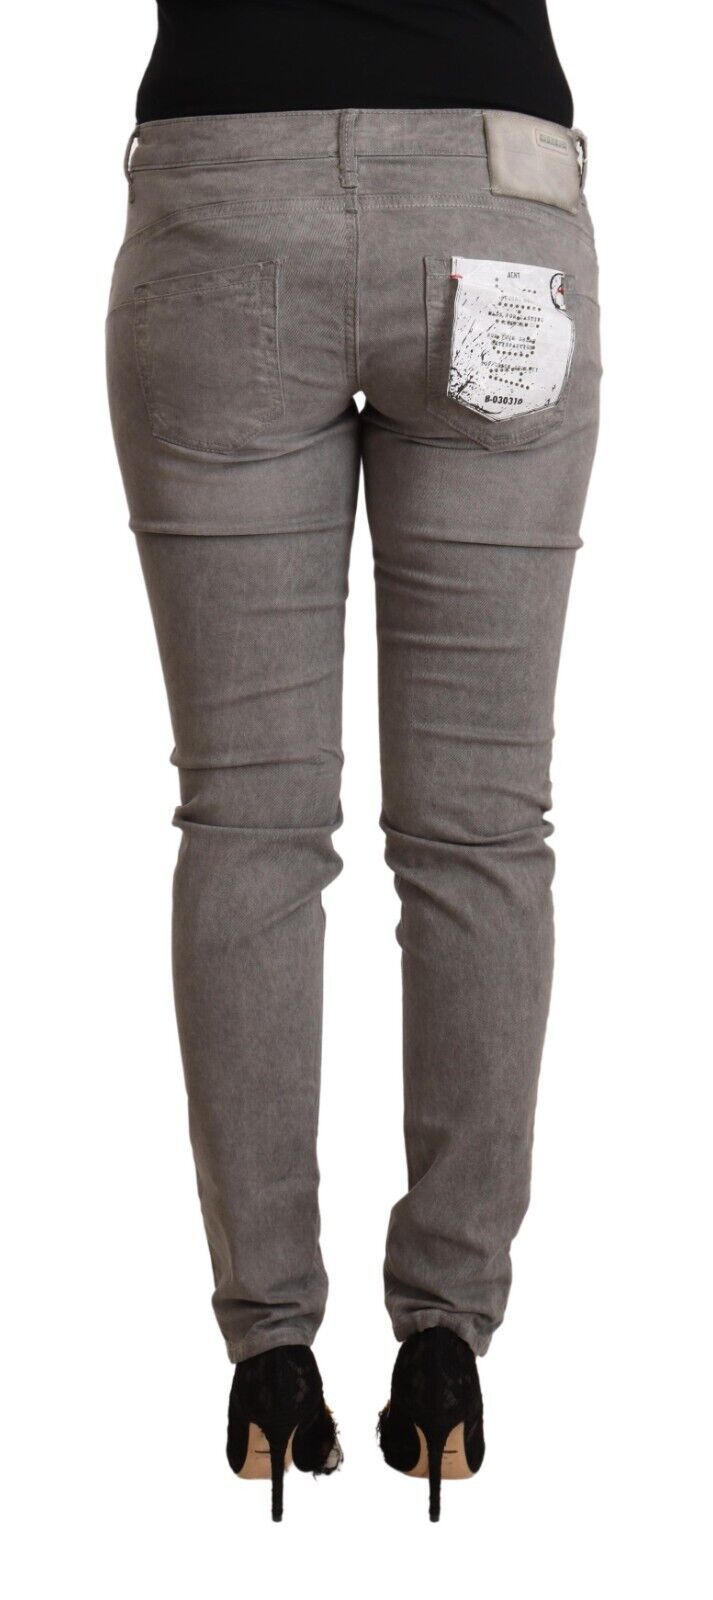 Acht Chic Gray Low Waist Skinny Cotton Jeans